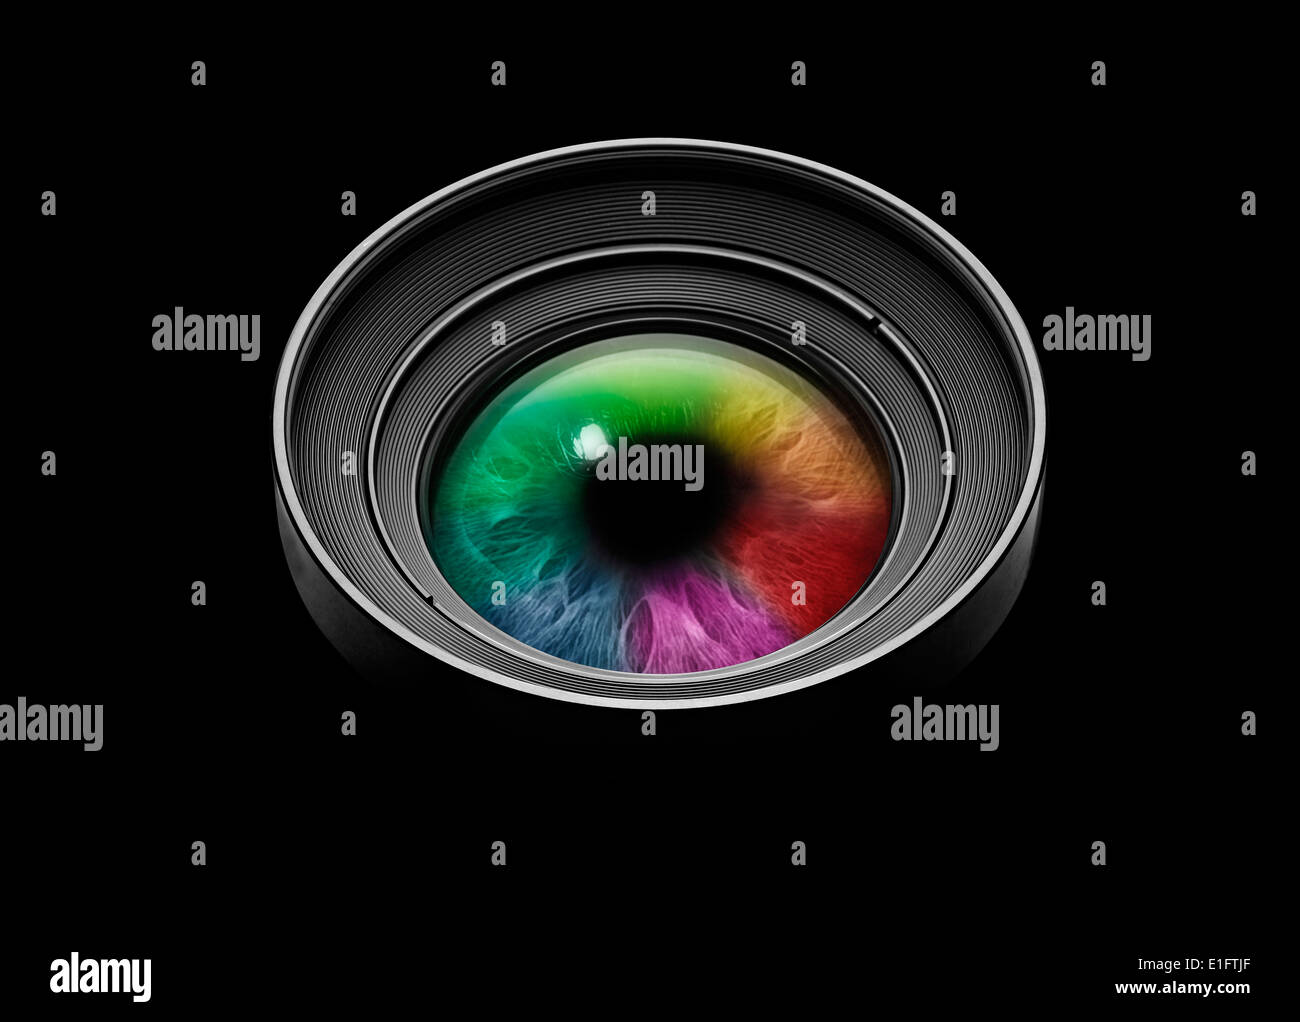 Camera lens with multicolored eye on black Stock Photo